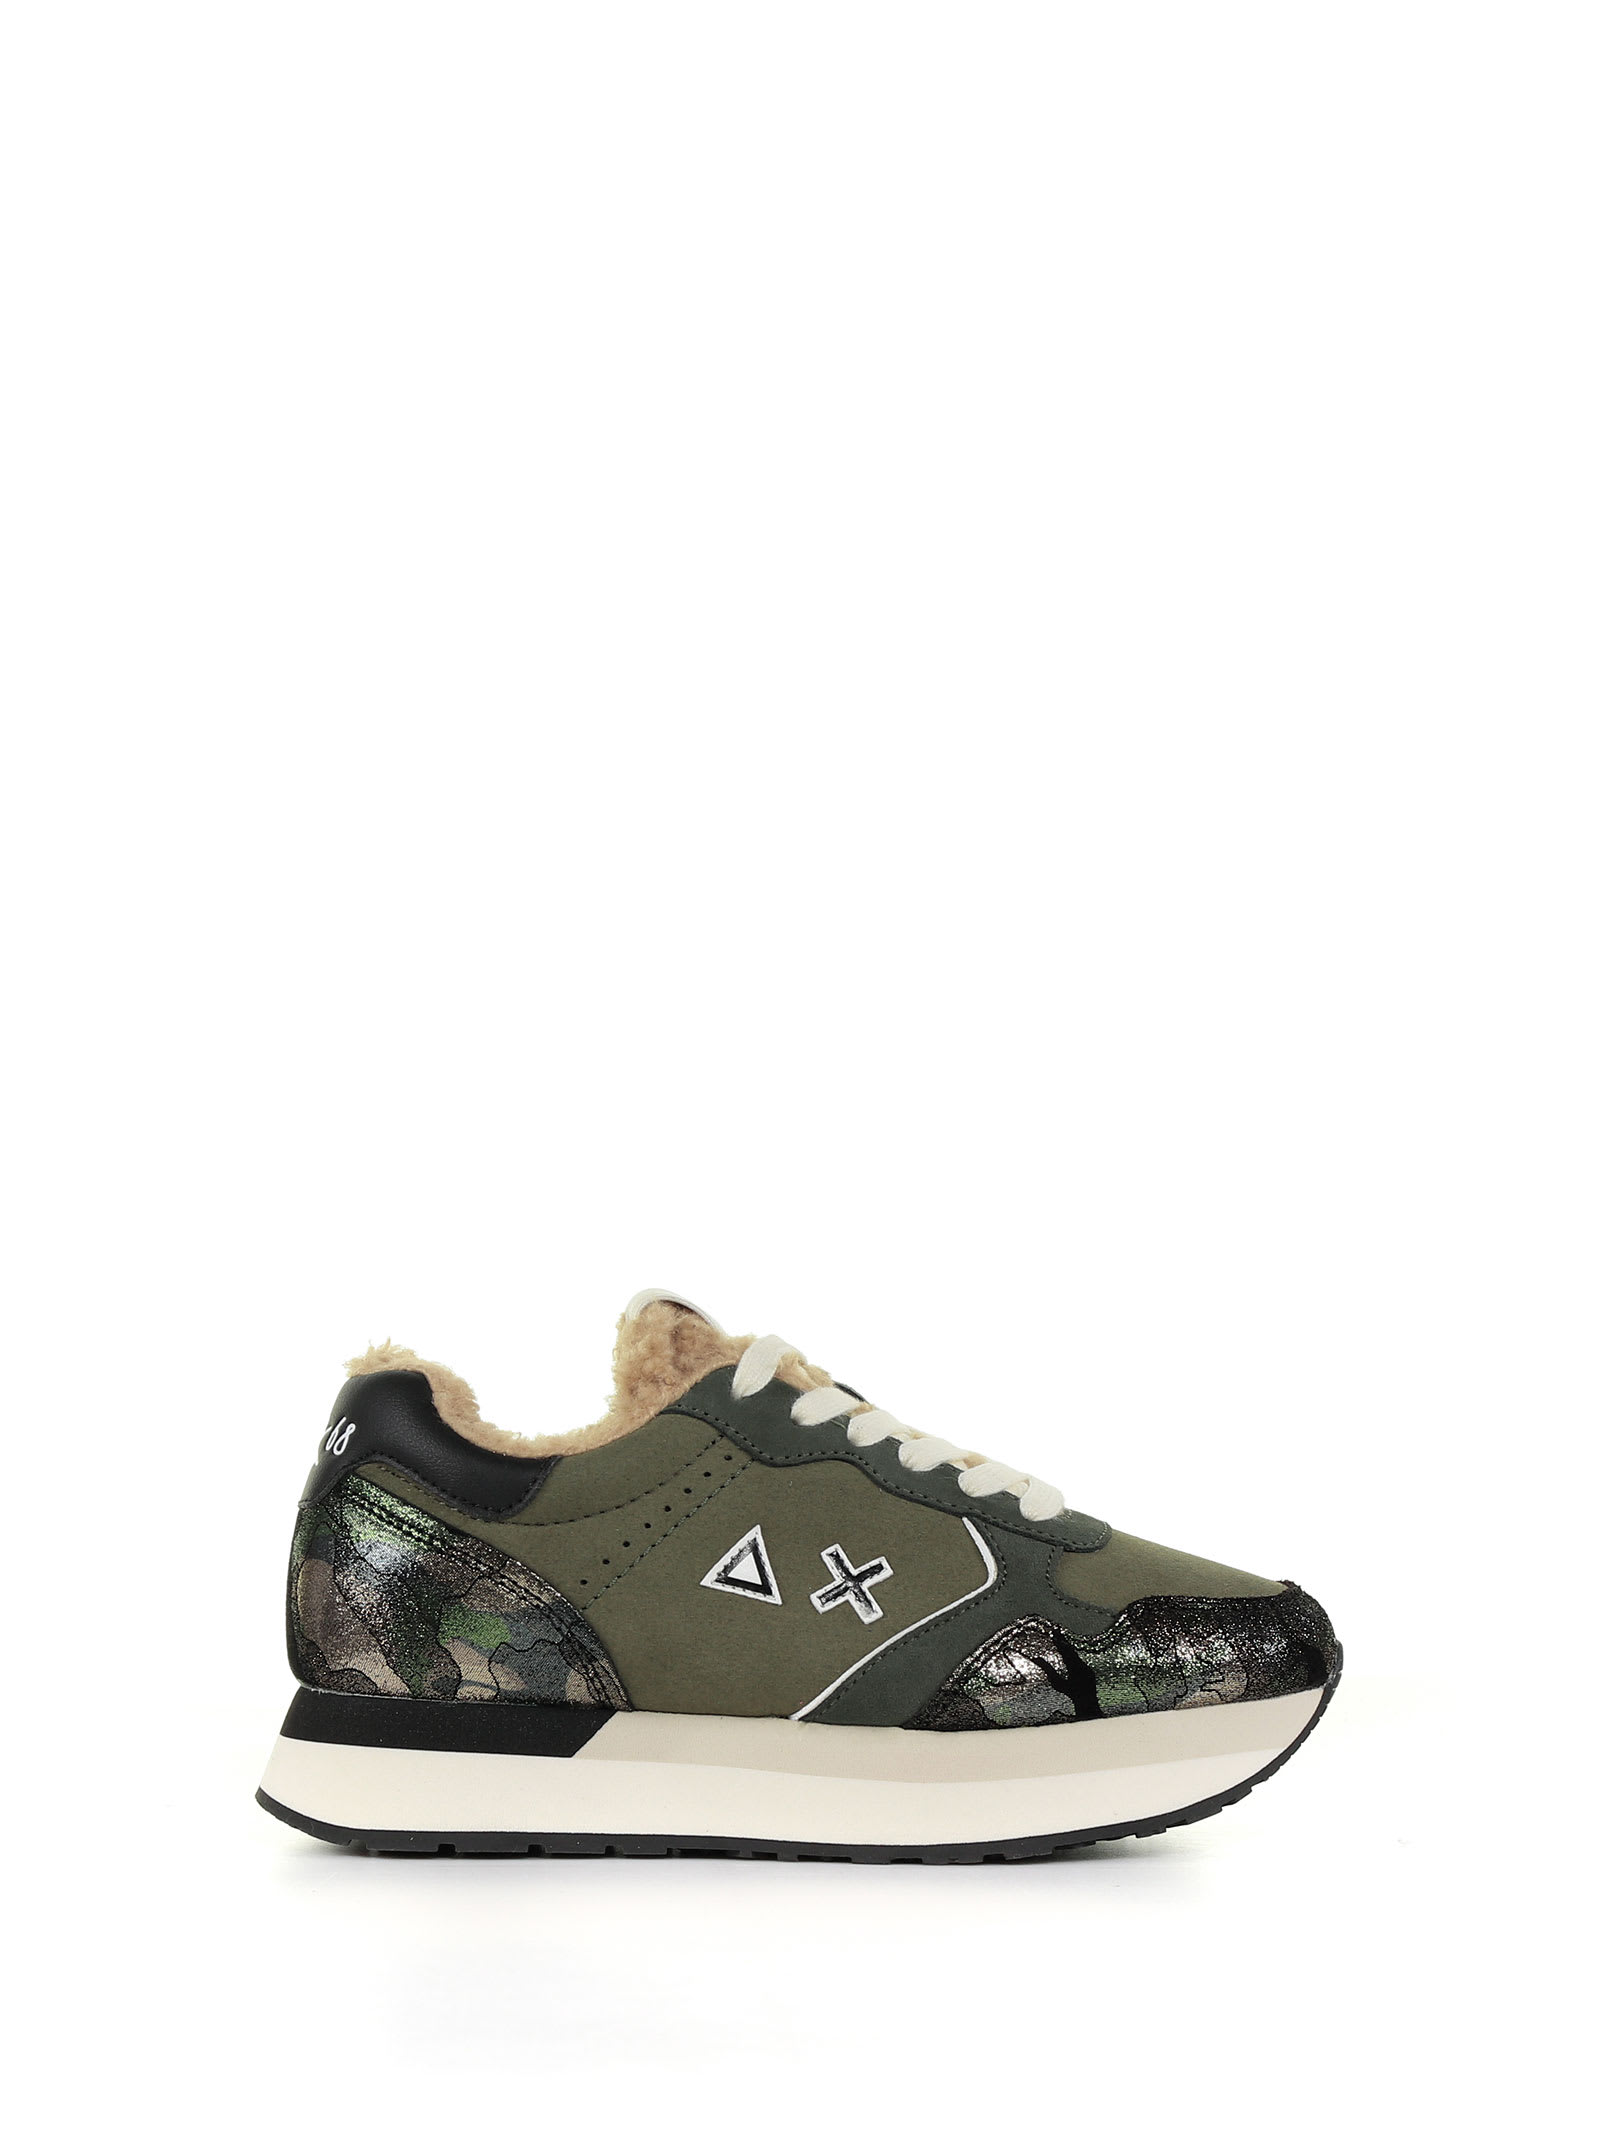 Sun 68 Kelly Teddy Sneaker With Camouflage Details